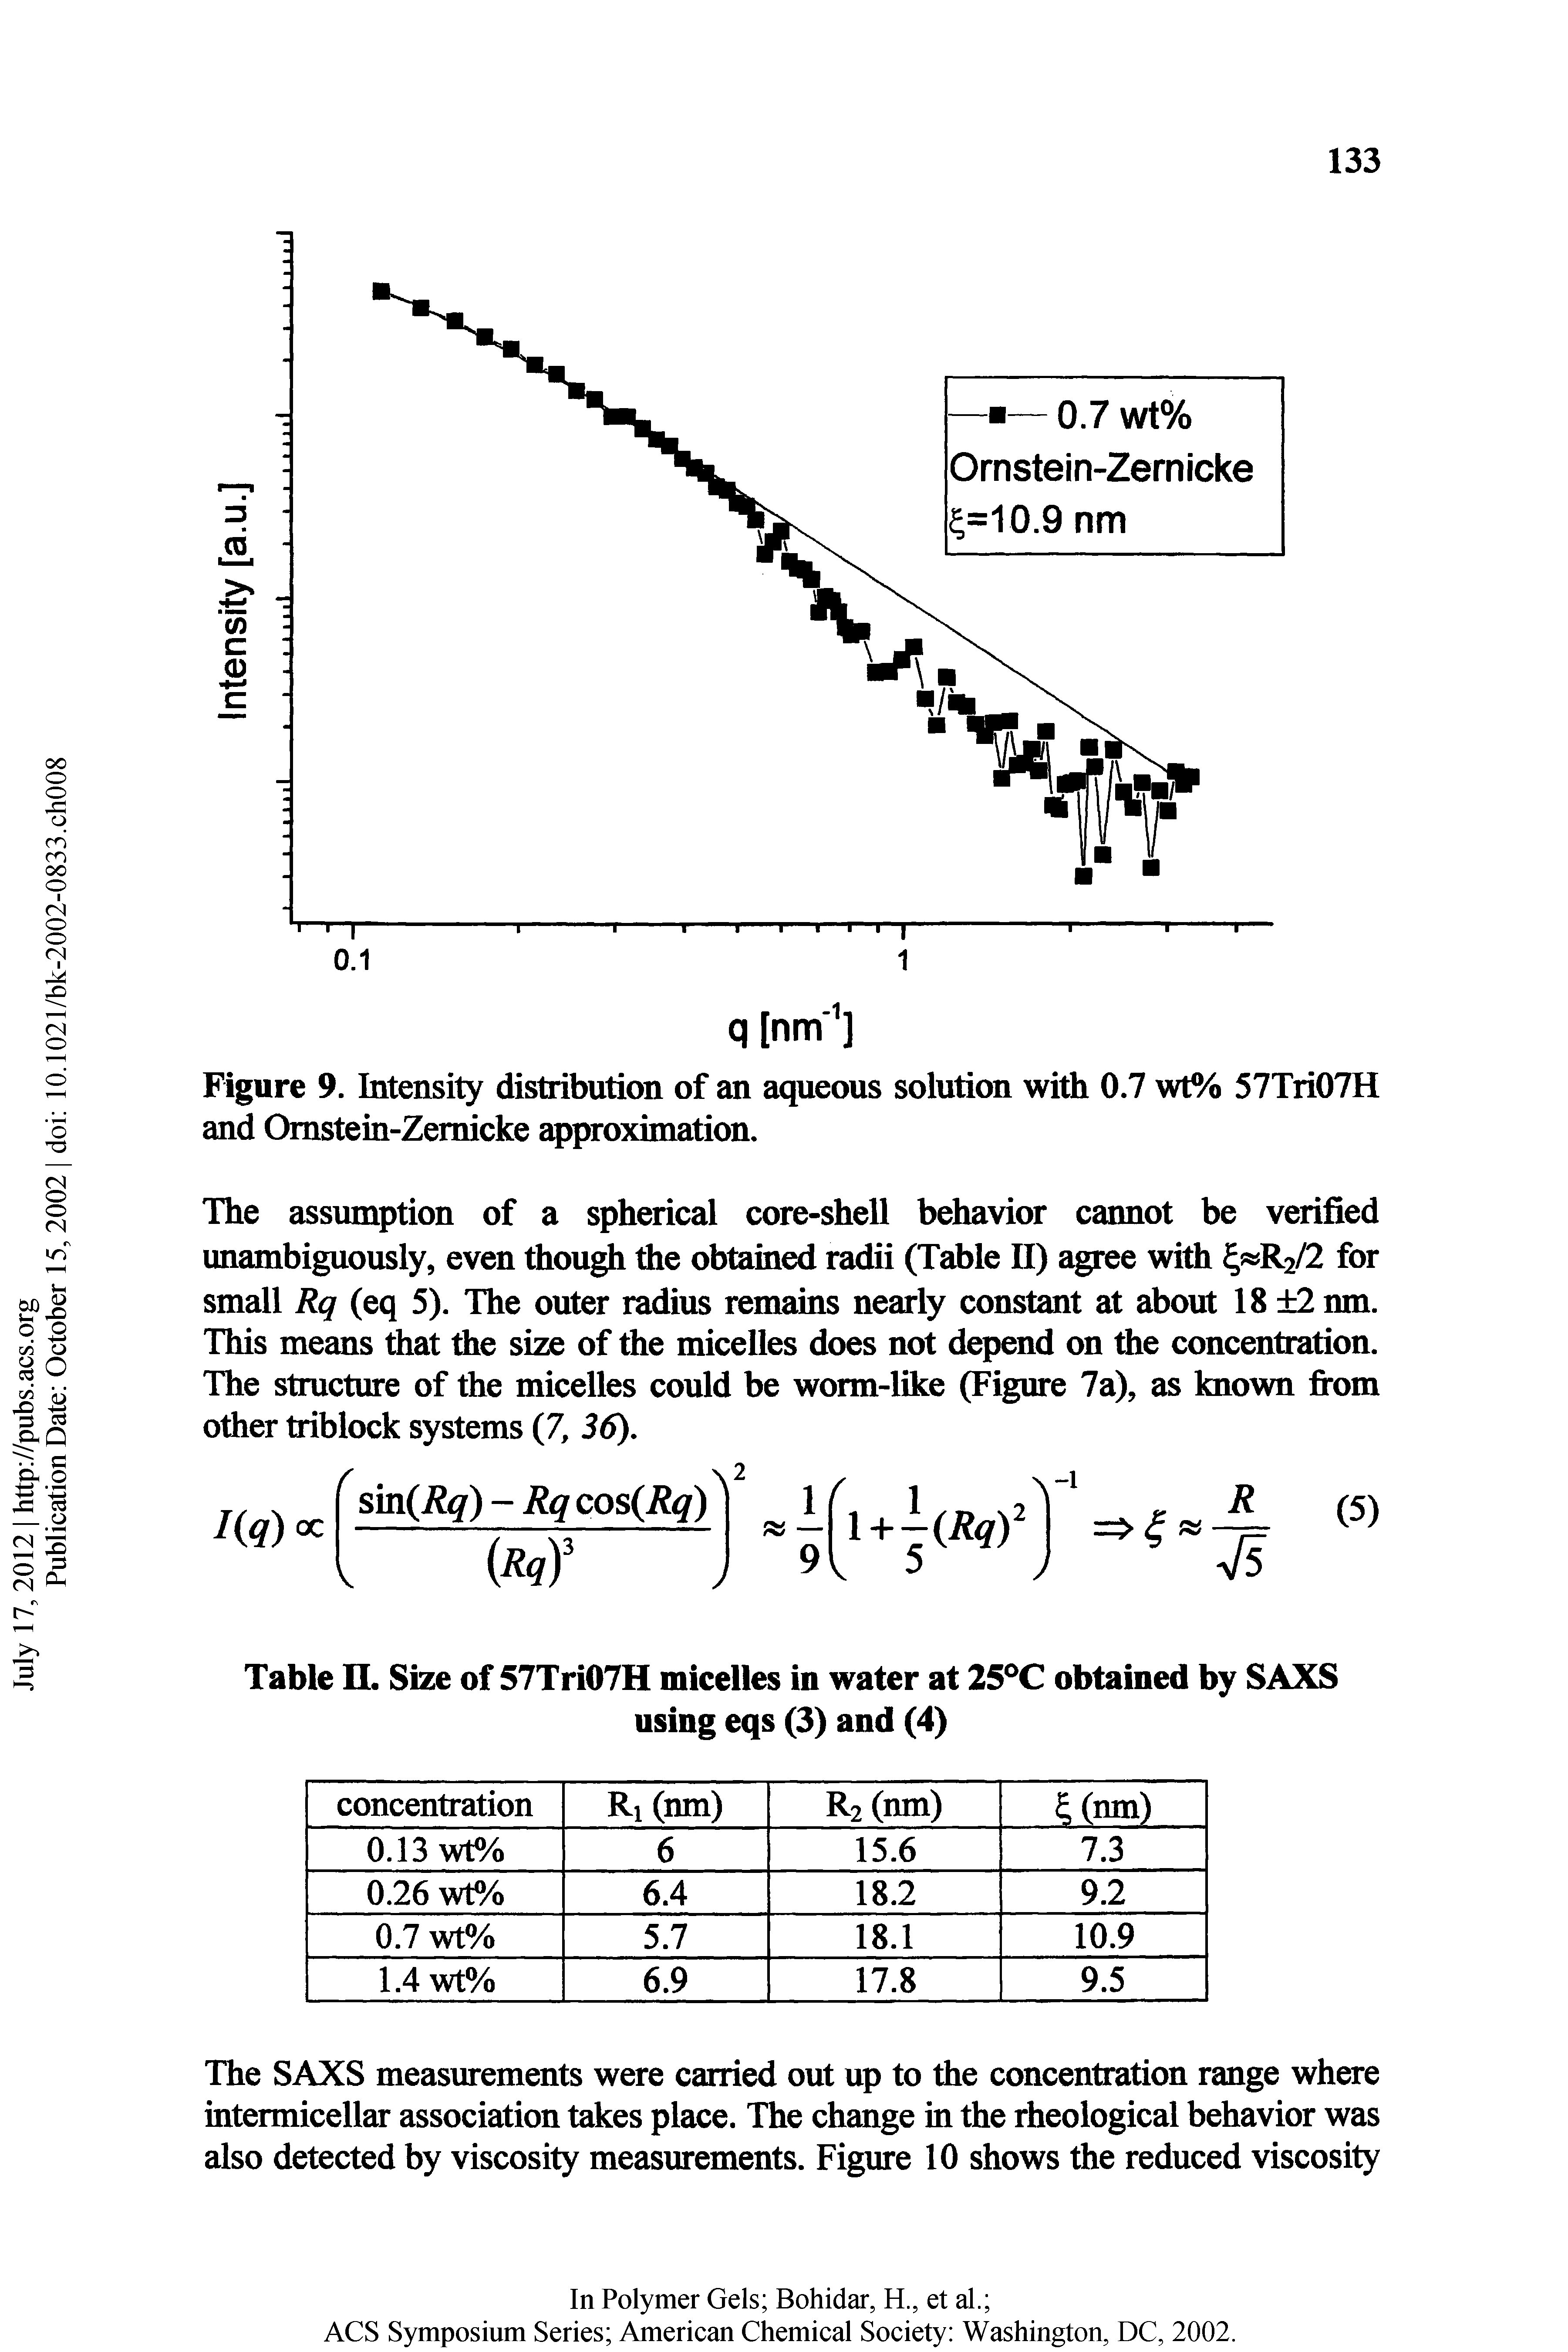 Figure 9. Intensity distribution of an aqueous solution with 0.7 wt% 57Tri07H and Omstein-Zemicke approximation.